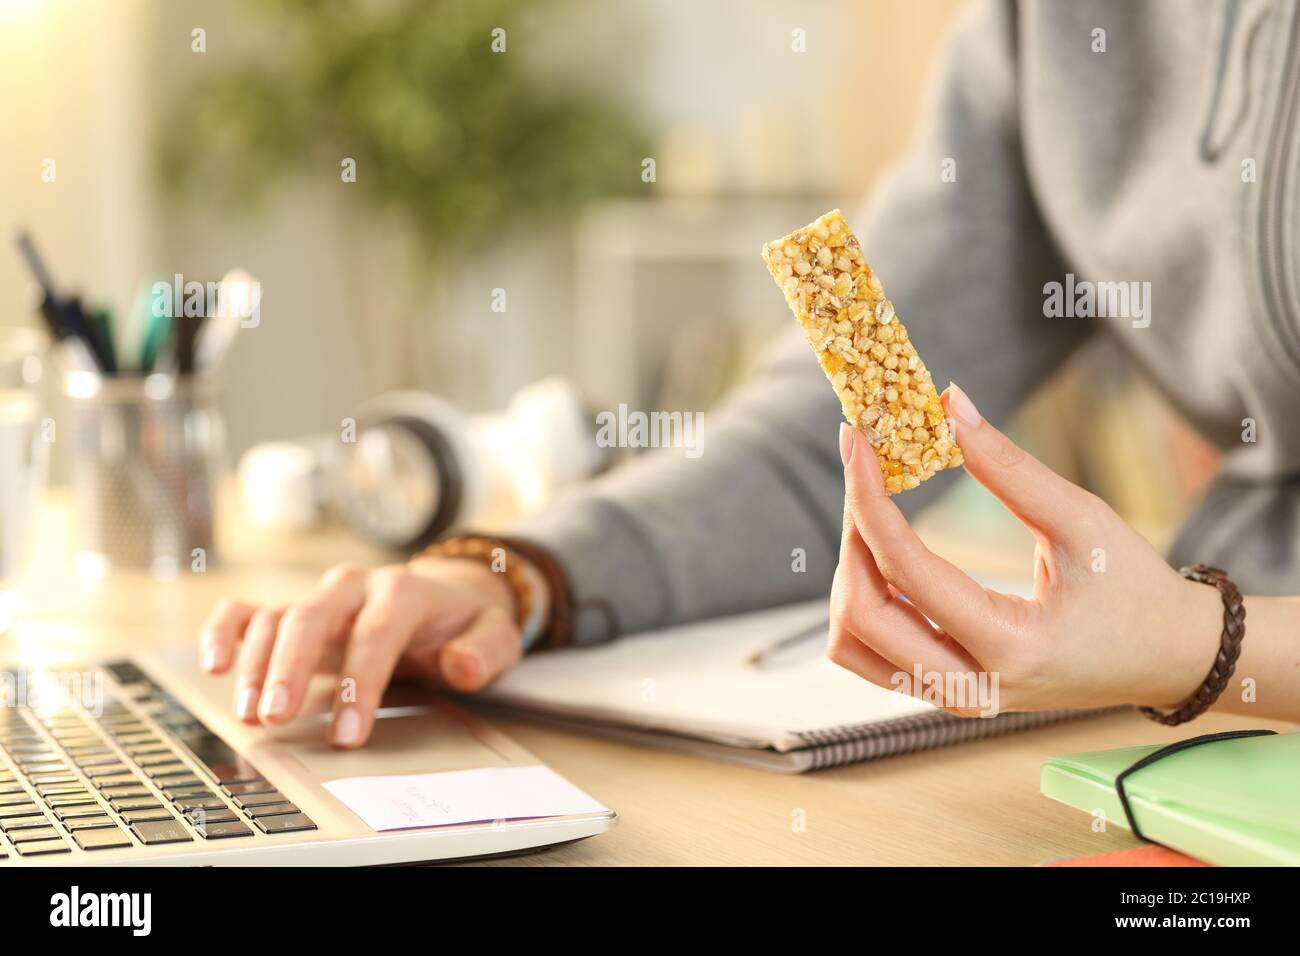 Close up of student girl hands holding snack bar using laptop at home Stock Photo